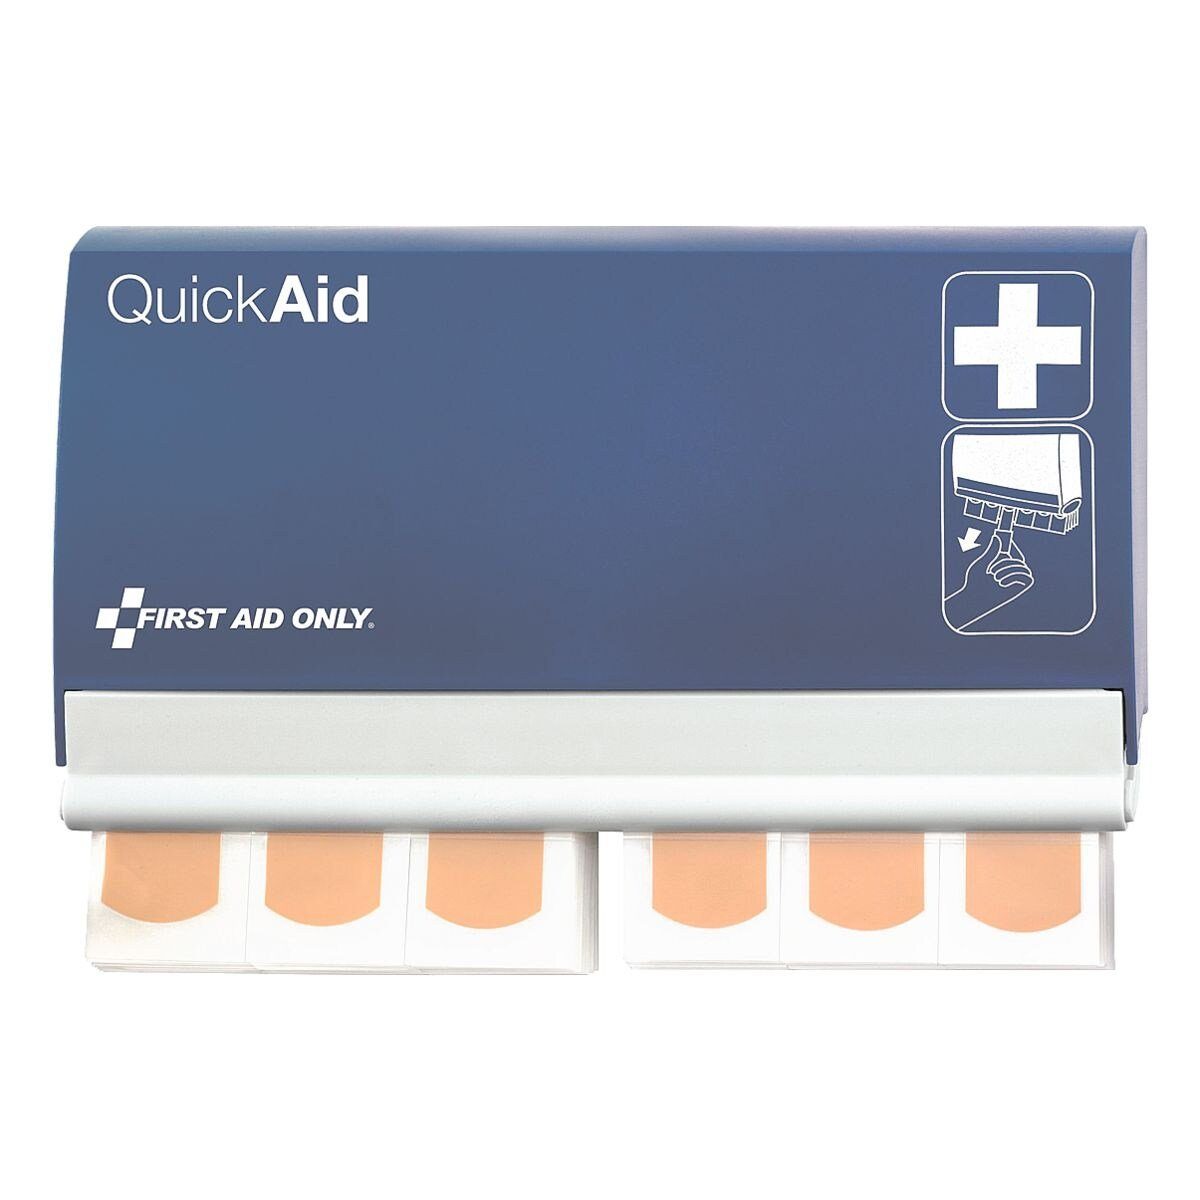 Pflasterspendersystem FIRST St), QuickAid ONLY® (90 AID Wundpflaster